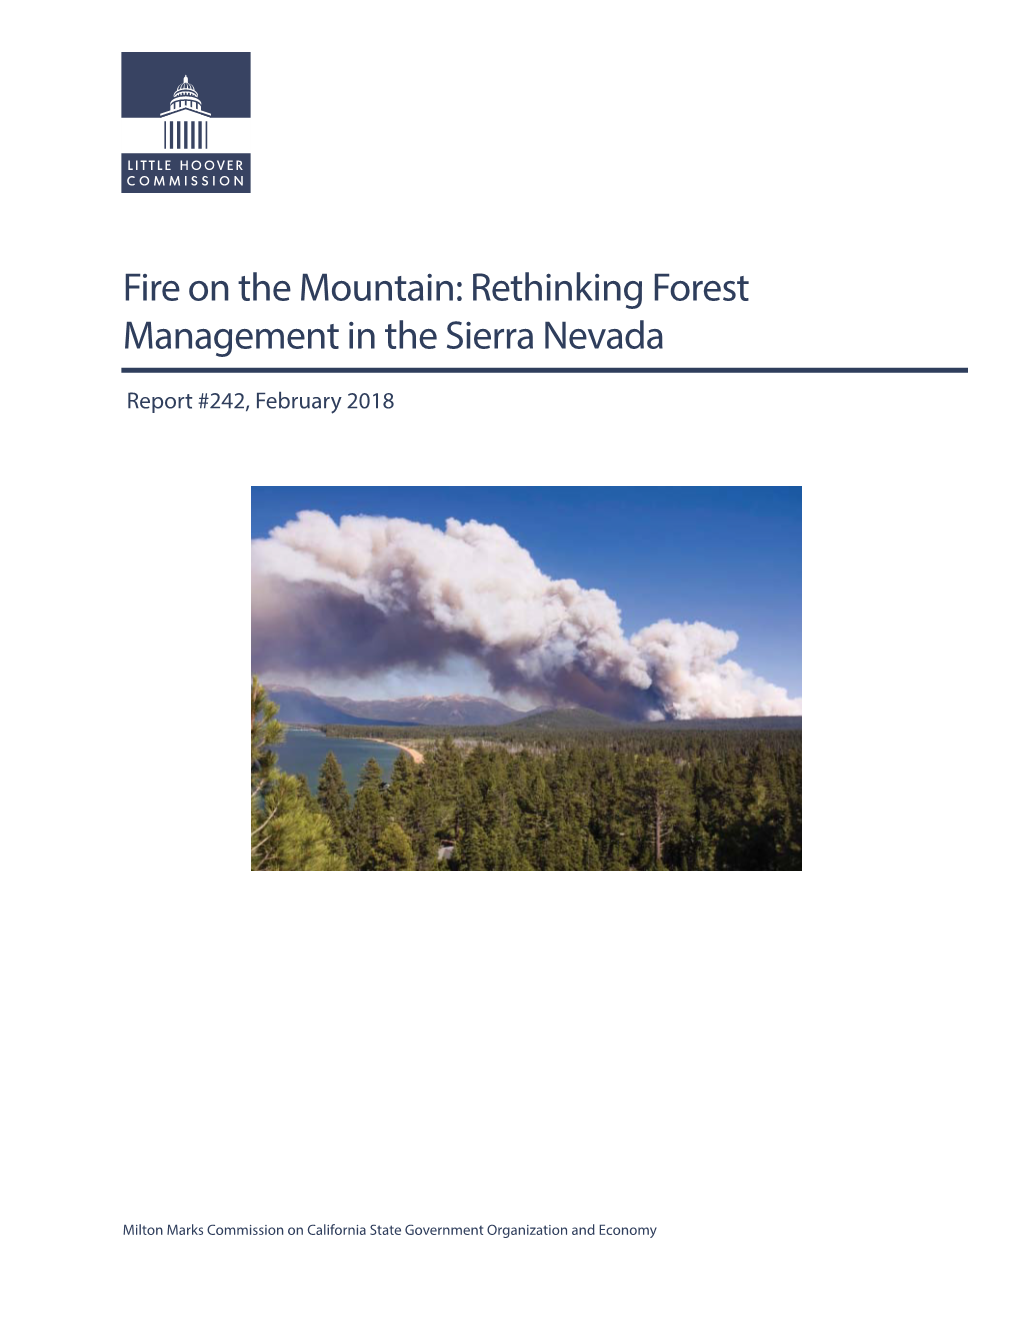 Fire on the Mountain: Rethinking Forest Management in the Sierra Nevada